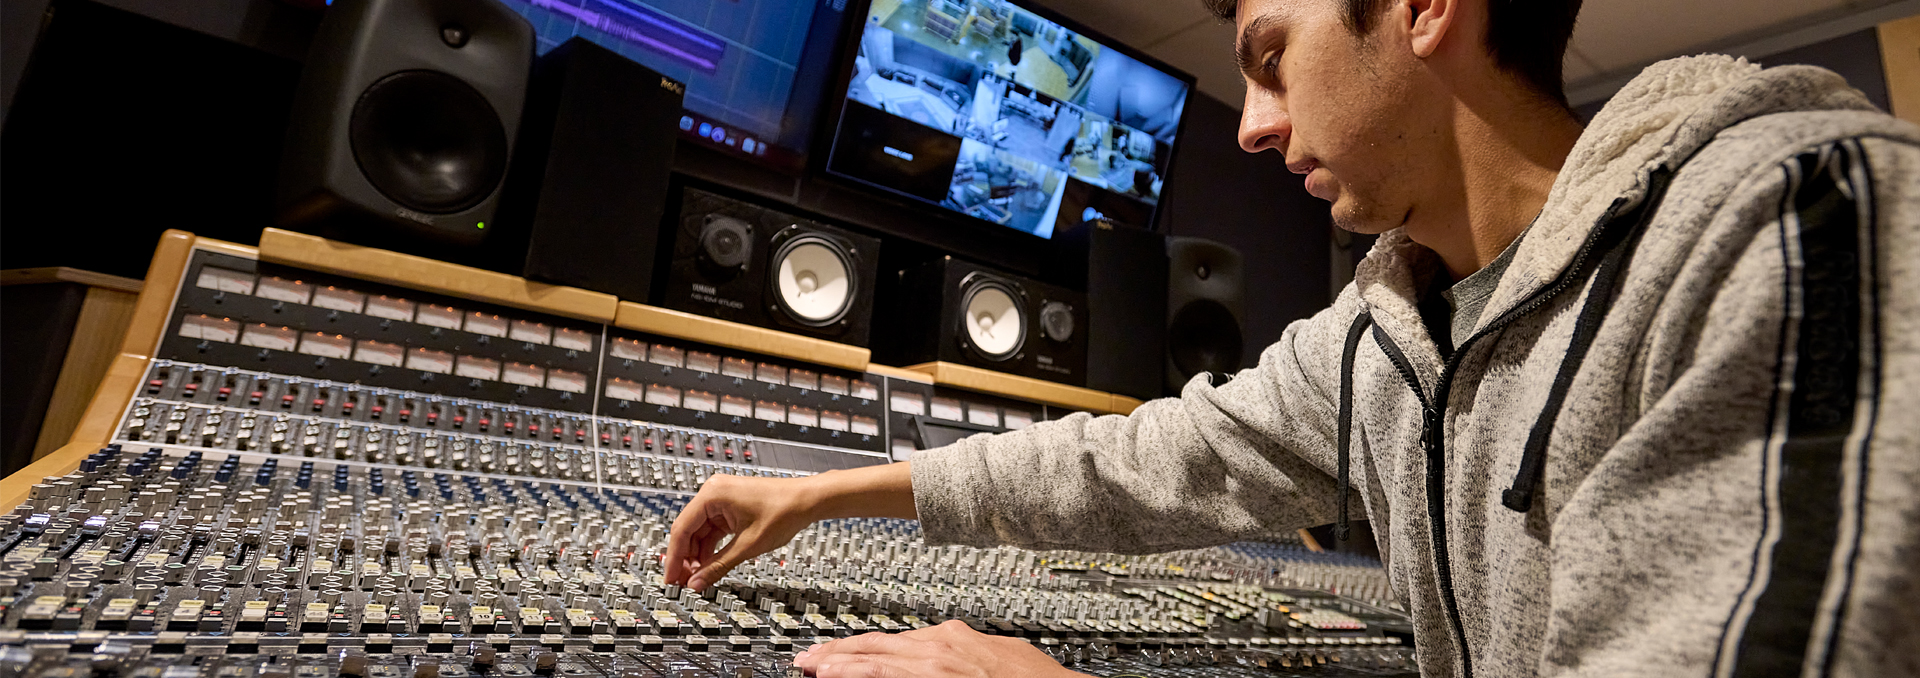 A student uses an audio mixer in the New England School of Communications audio suite